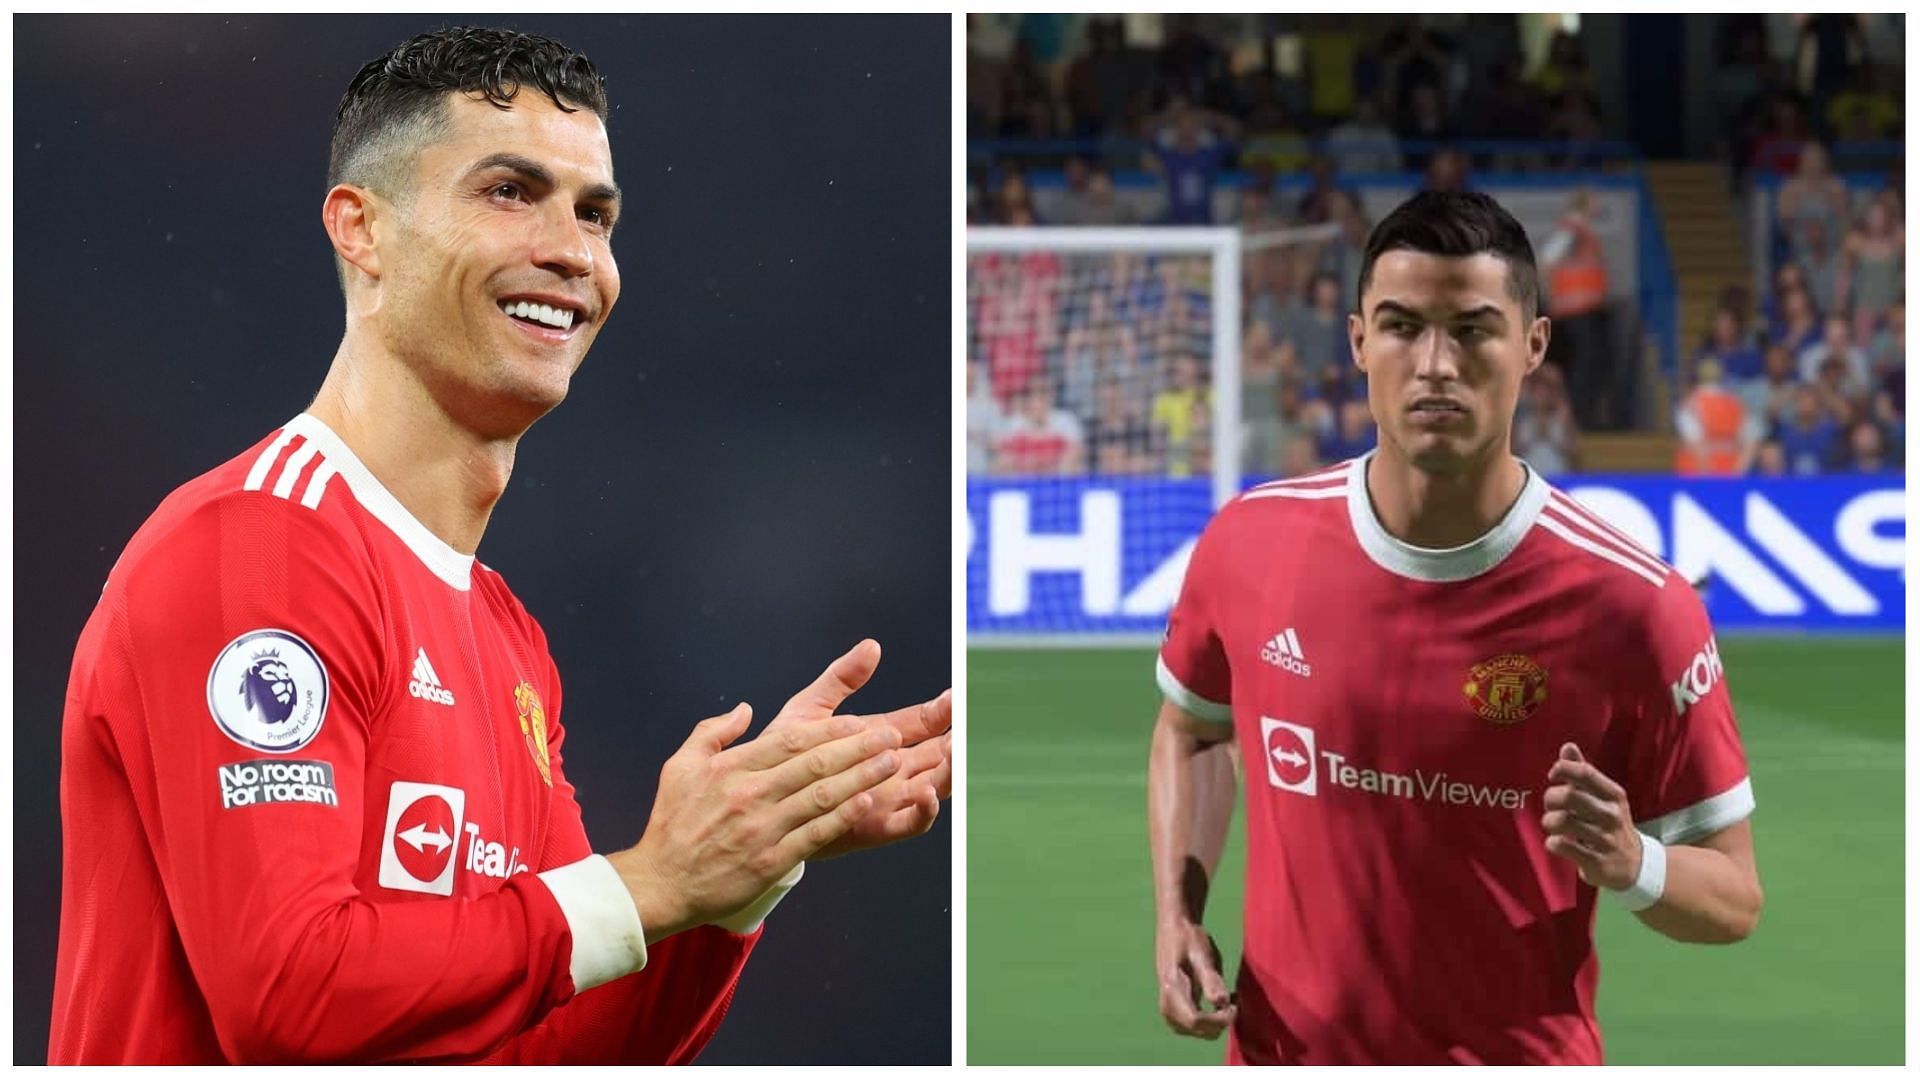 Cristiano Ronaldo is amongst the best attackers in FIFA 23 despite ratings downgrade (Images via Getty Images and EA Sports)